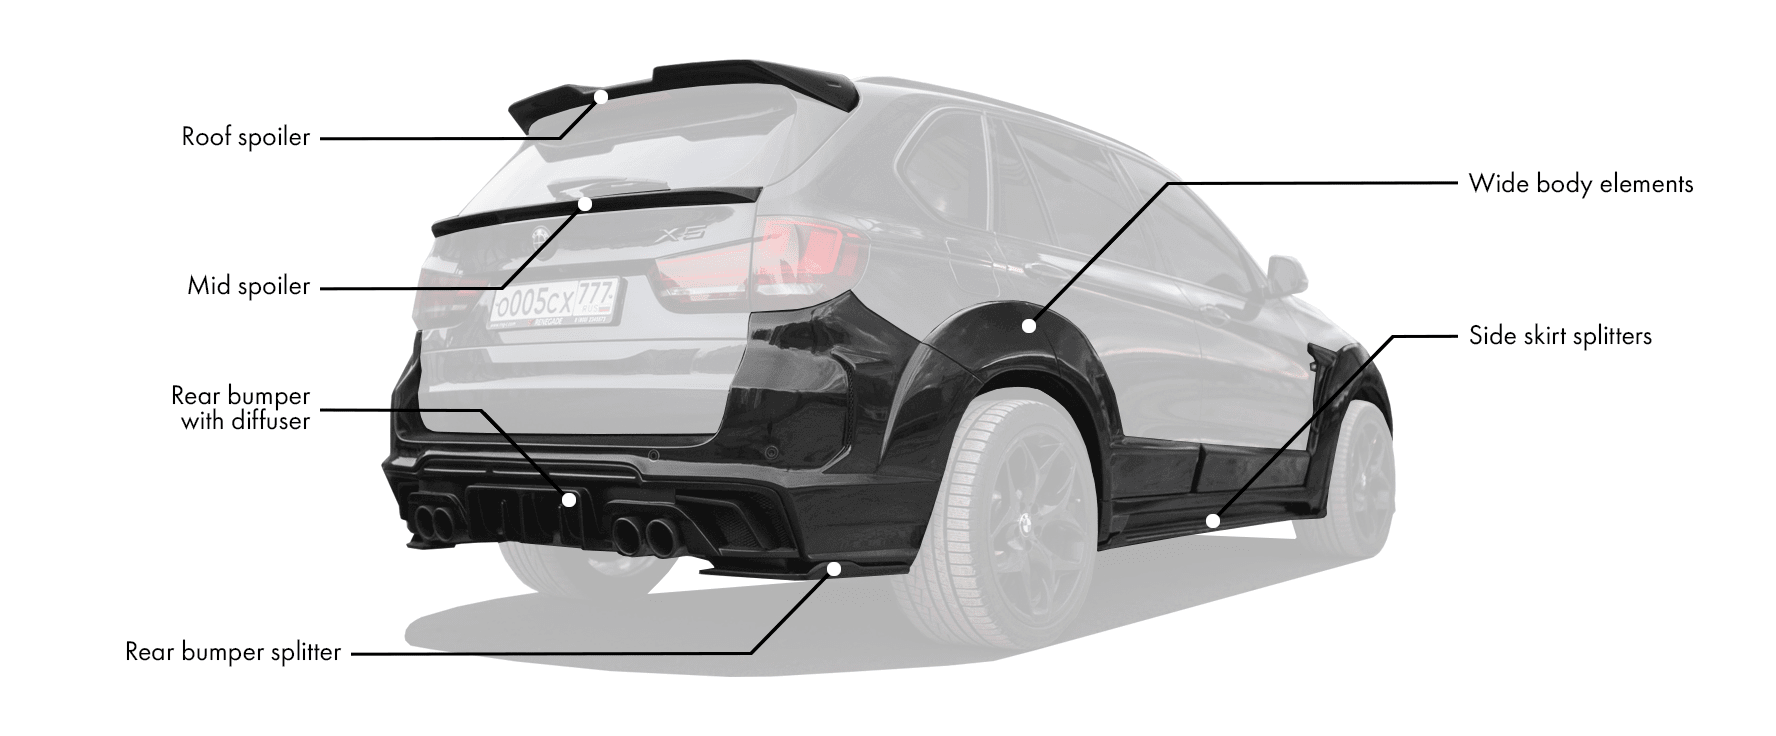 Full body kit for BMW X5 F15/F85 includes